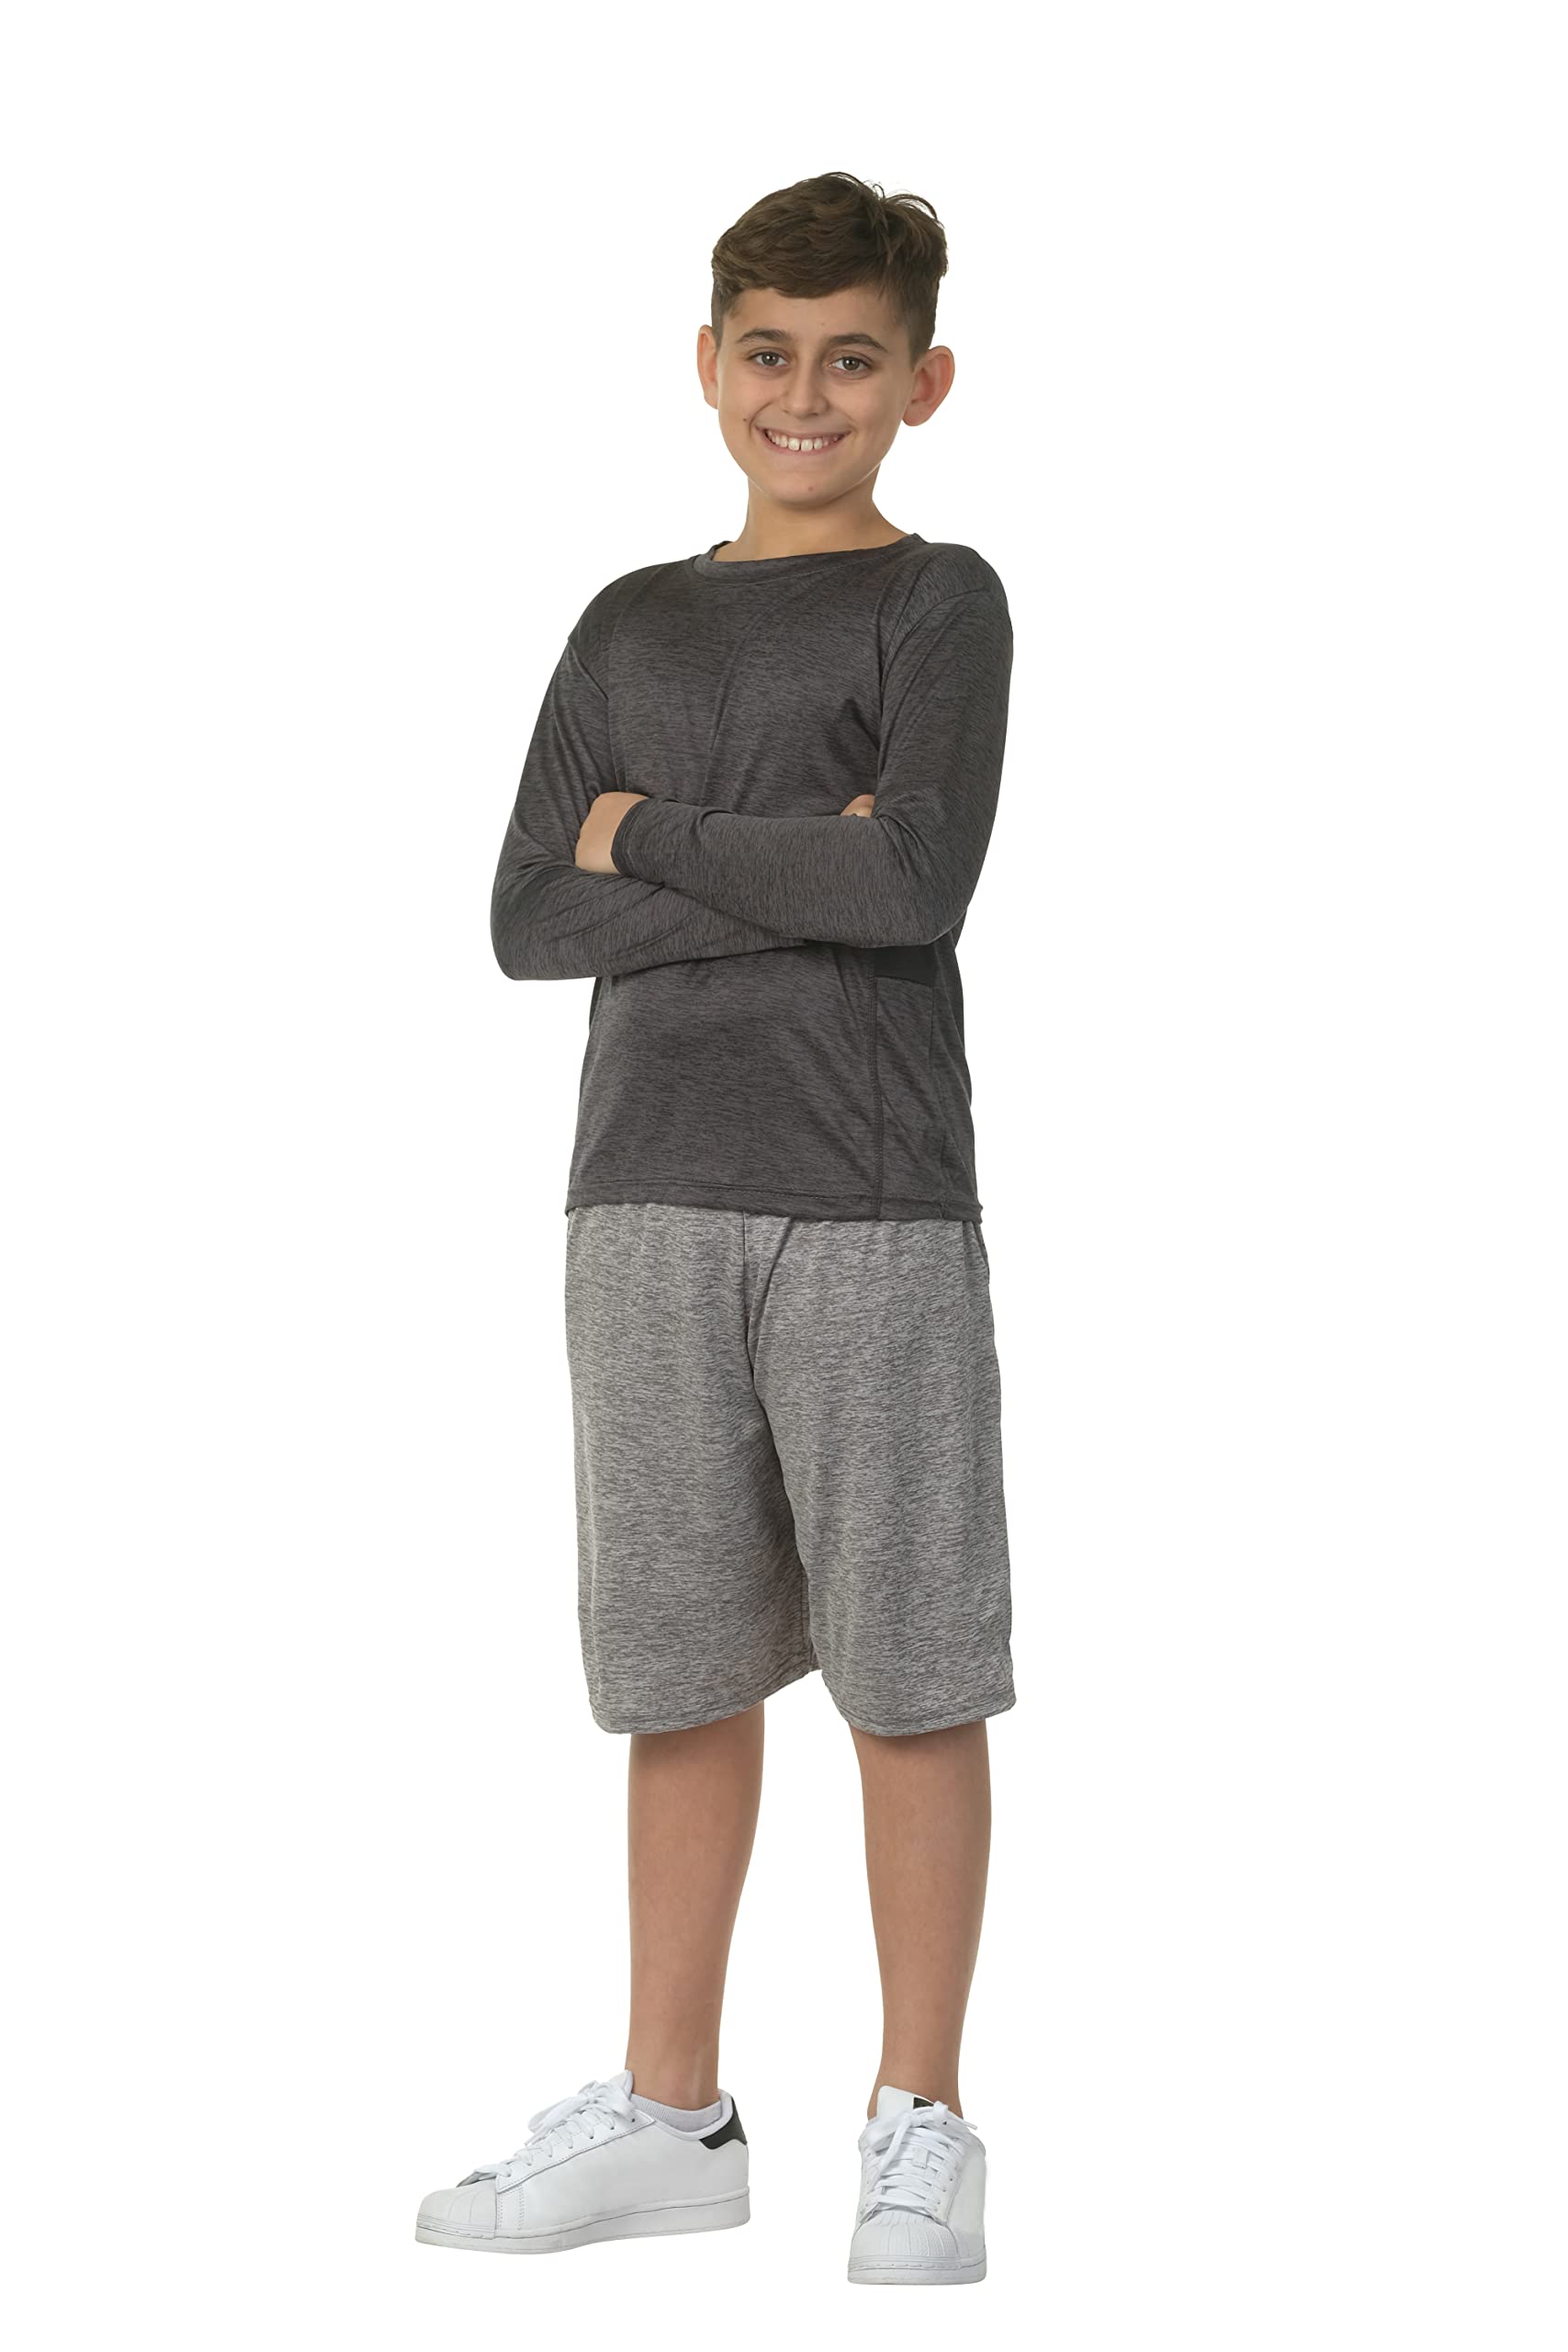 4 Pack: Youth Dry-Fit Moisture Wicking Active Athletic Performance Long-Sleeve T-Shirt Boys & Girls